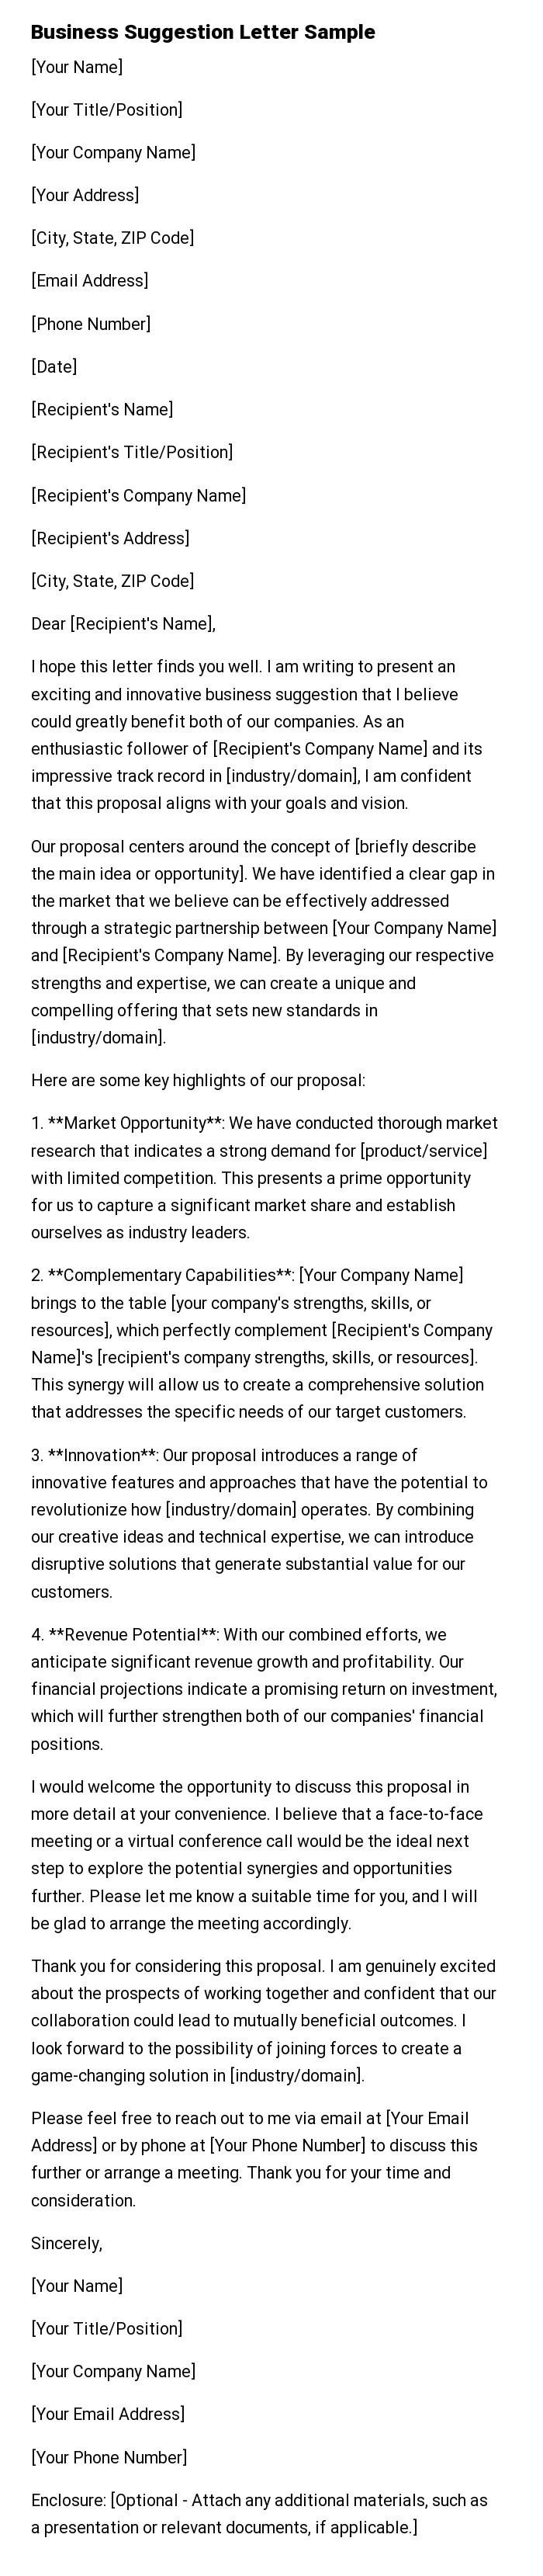 Business Suggestion Letter Sample